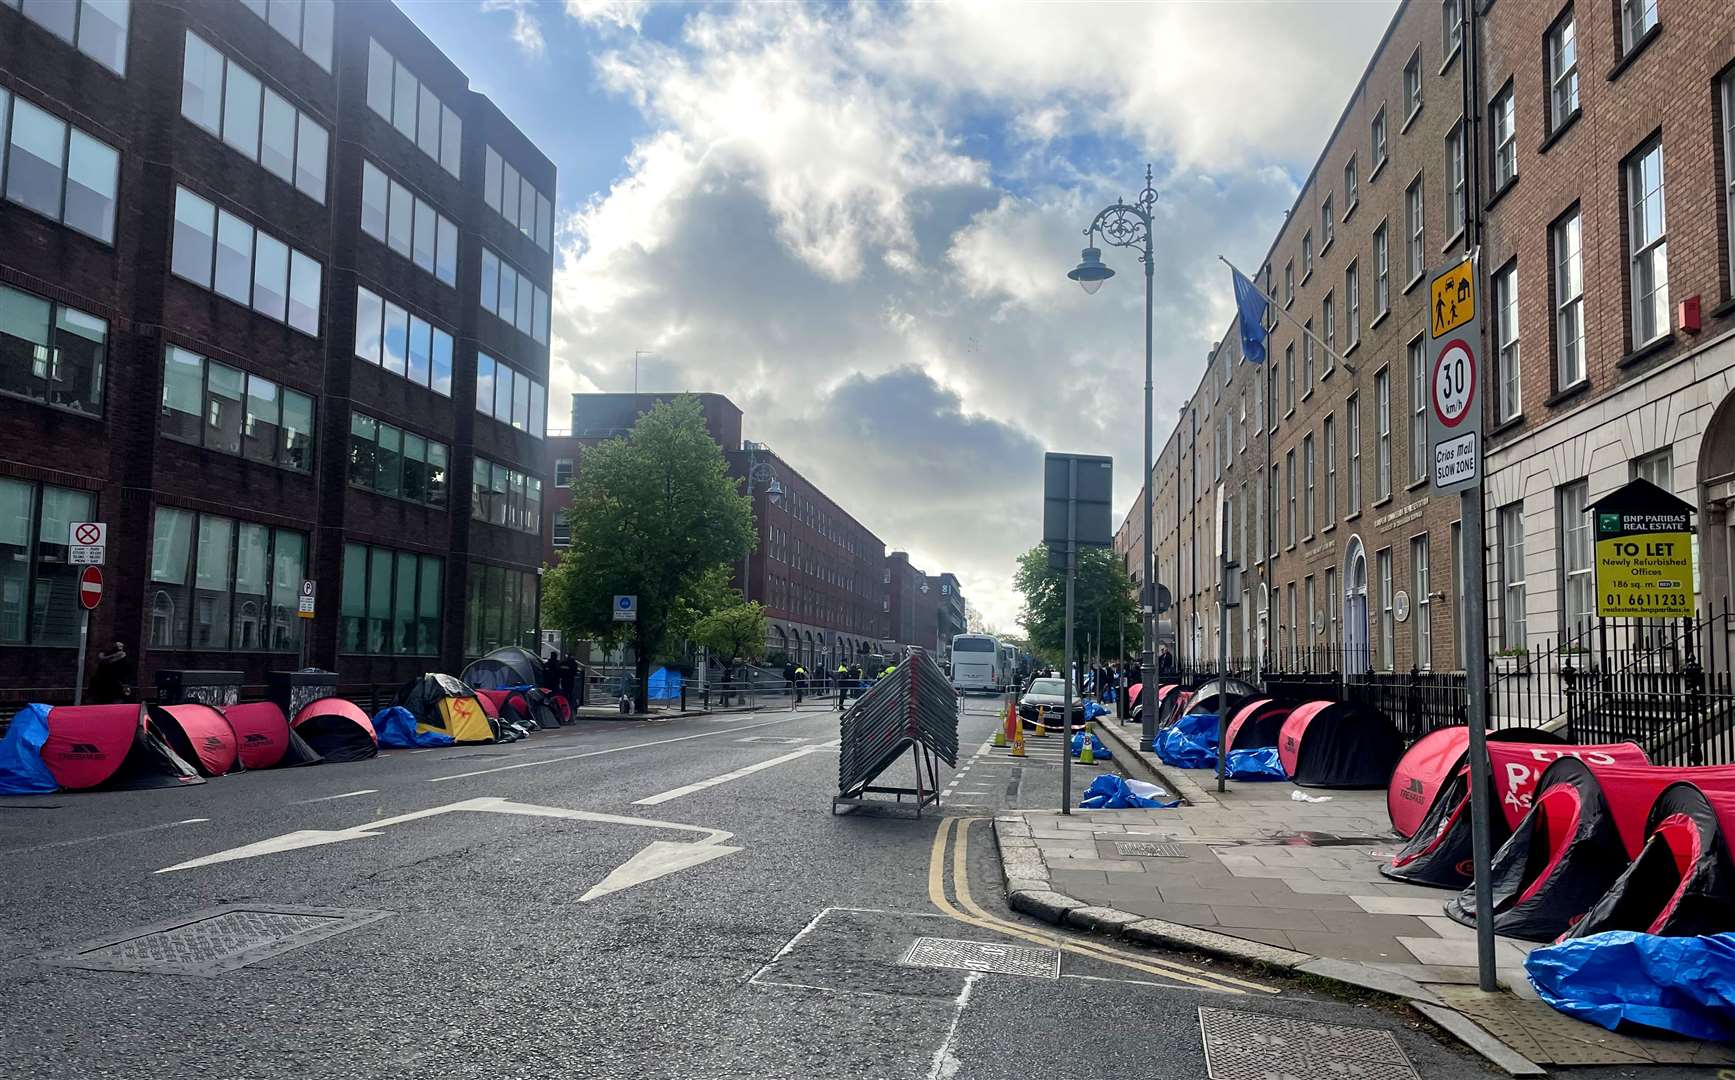 Authorities commenced an operation on Wednesday to move asylum seekers in central Dublin (Cate McCurry/PA)